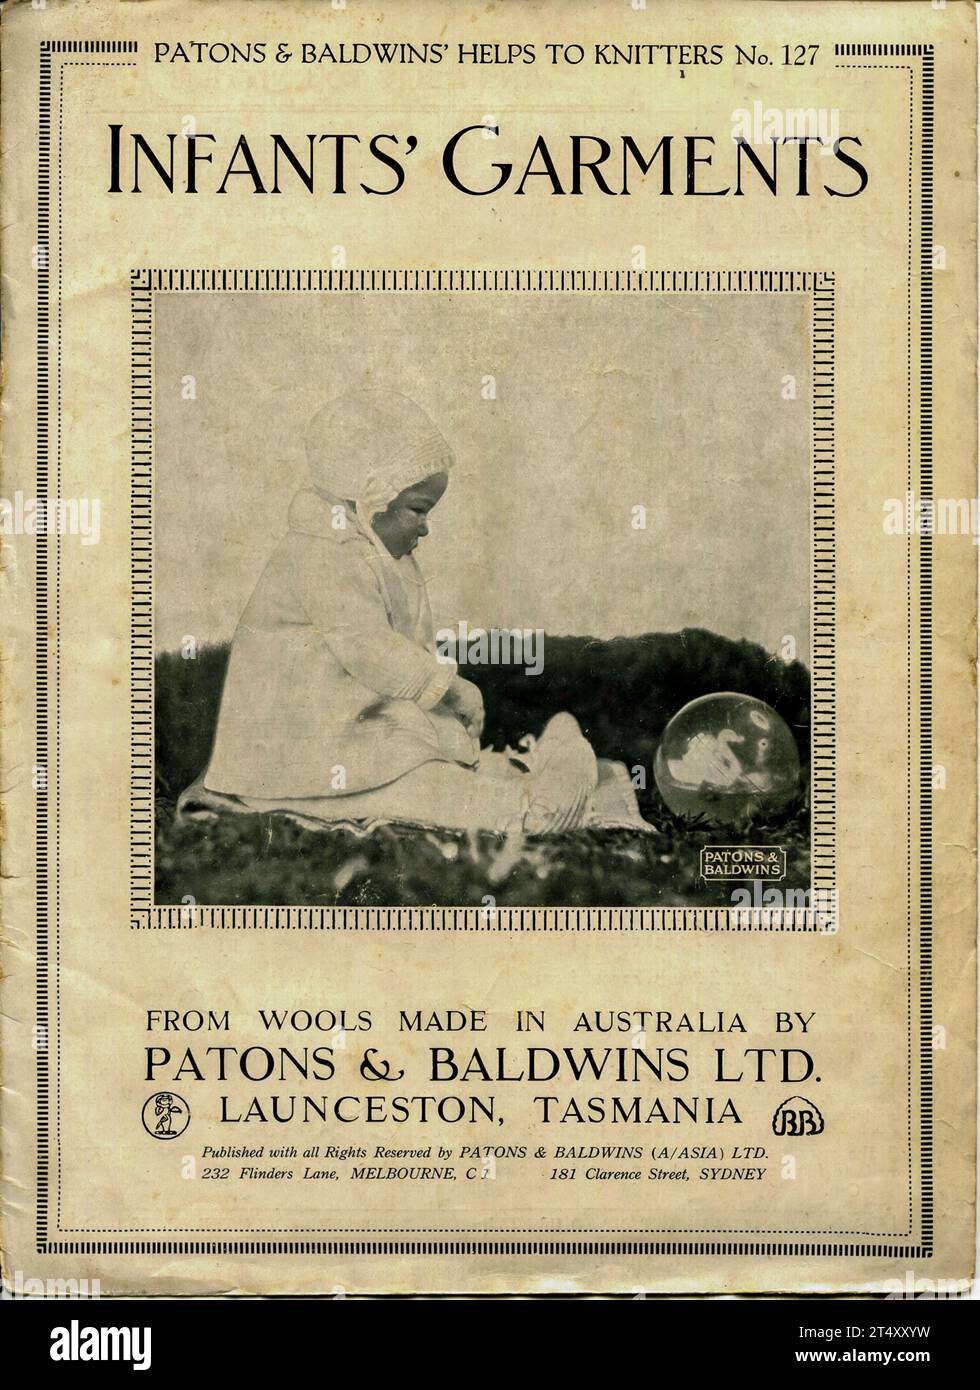 A historical 1930's Australian advertisement for knitting yarn company Patons and Baldwins for baby's knitting patterns Stock Photo